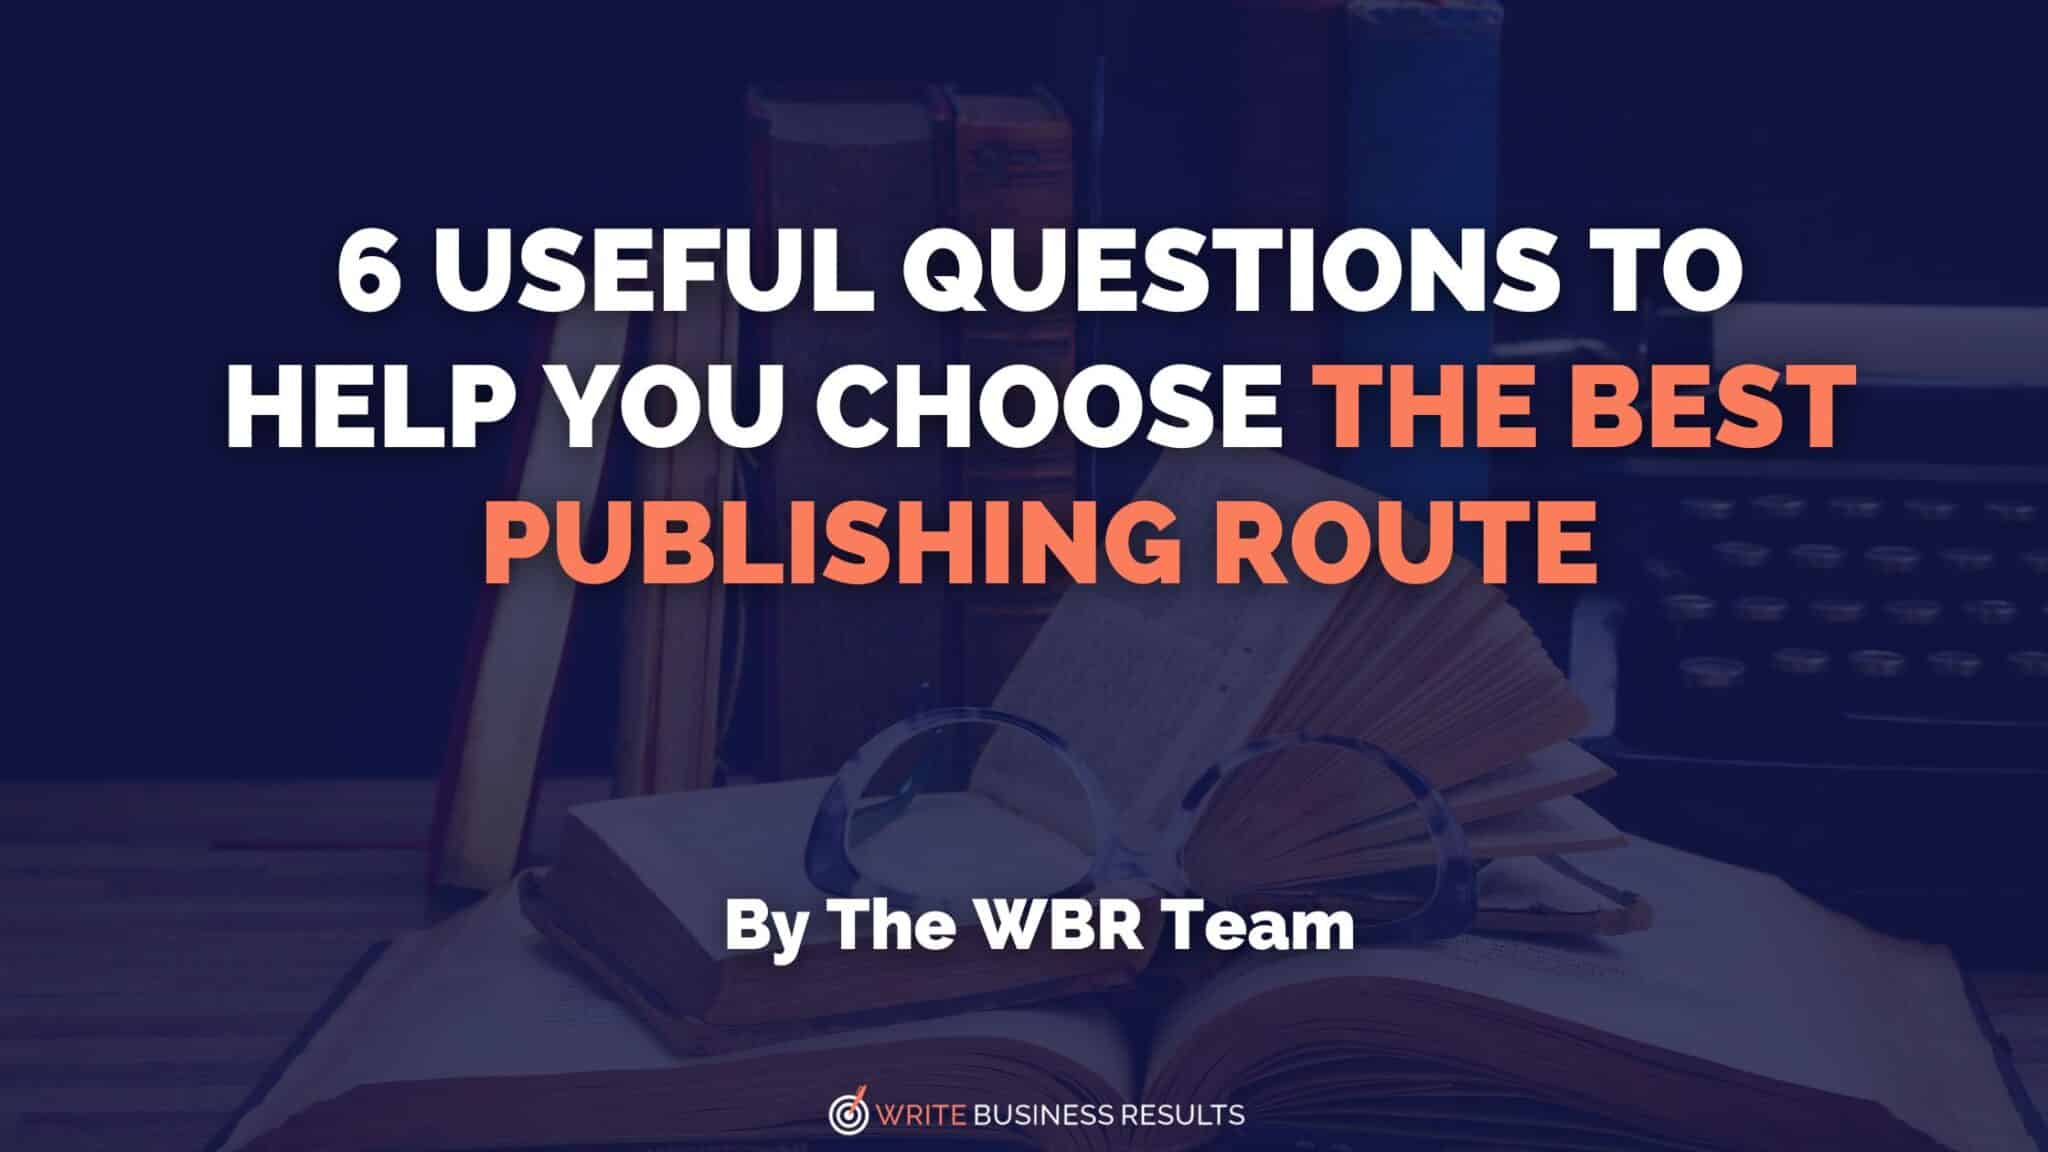 6 Useful Questions To Help You Choose The Best Publishing Route